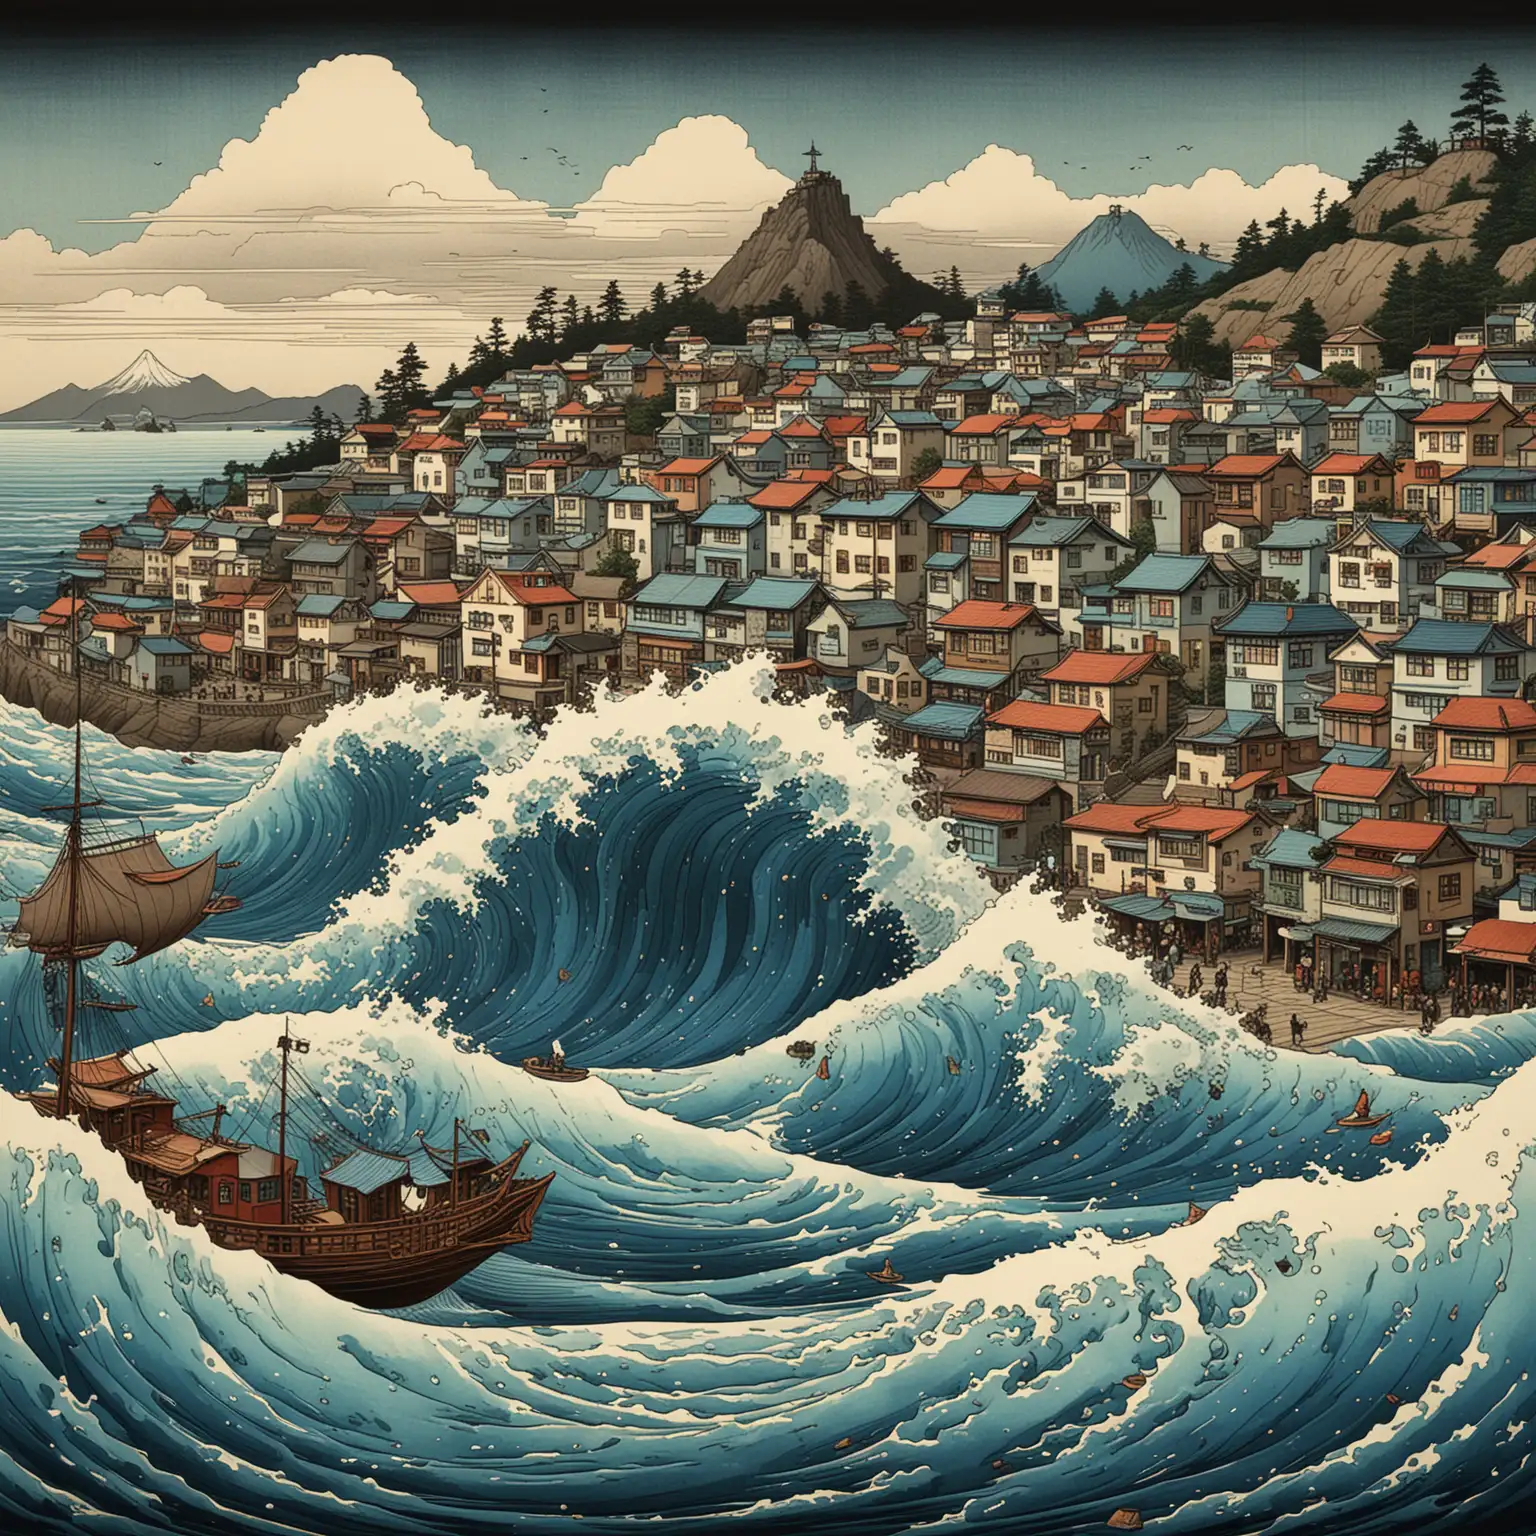 Surreal seaside town, incorporating Hiroshige's 'The Wave at Kanagawa' and Escher's geometric illusions